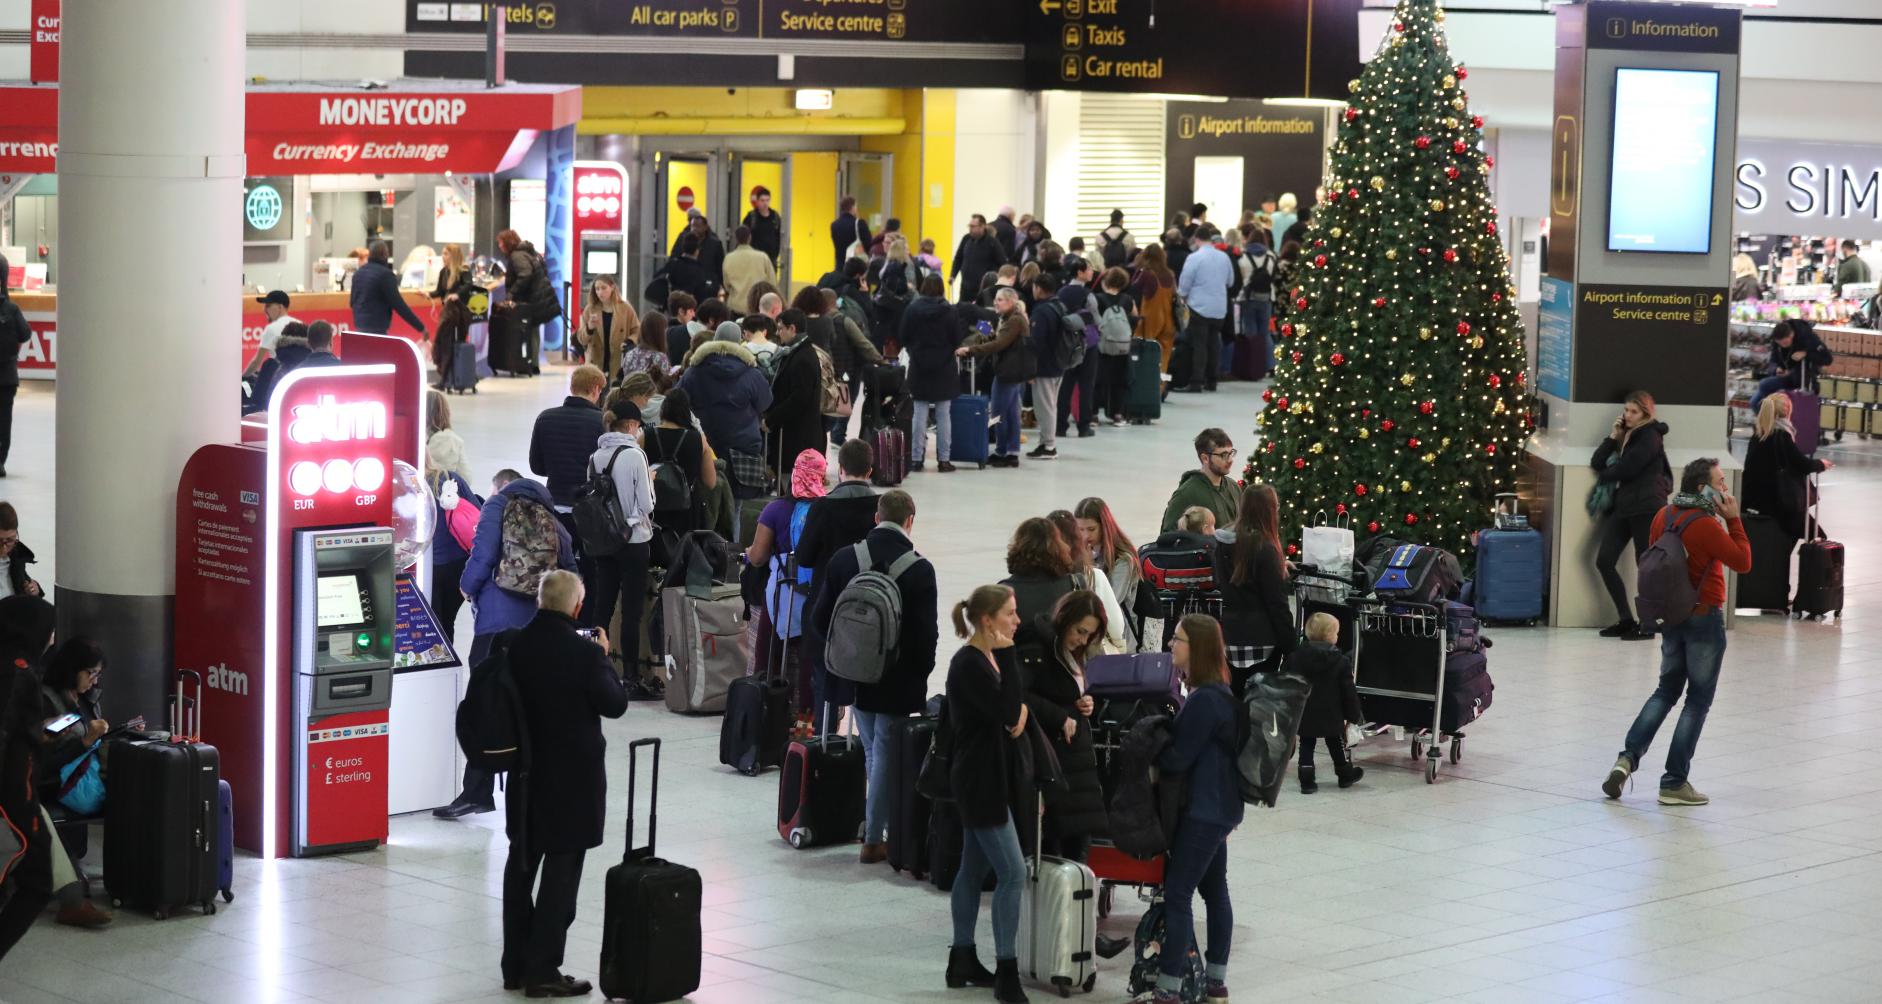 long queue at the airport during the holidays, six month Clear Membership as a gift idea